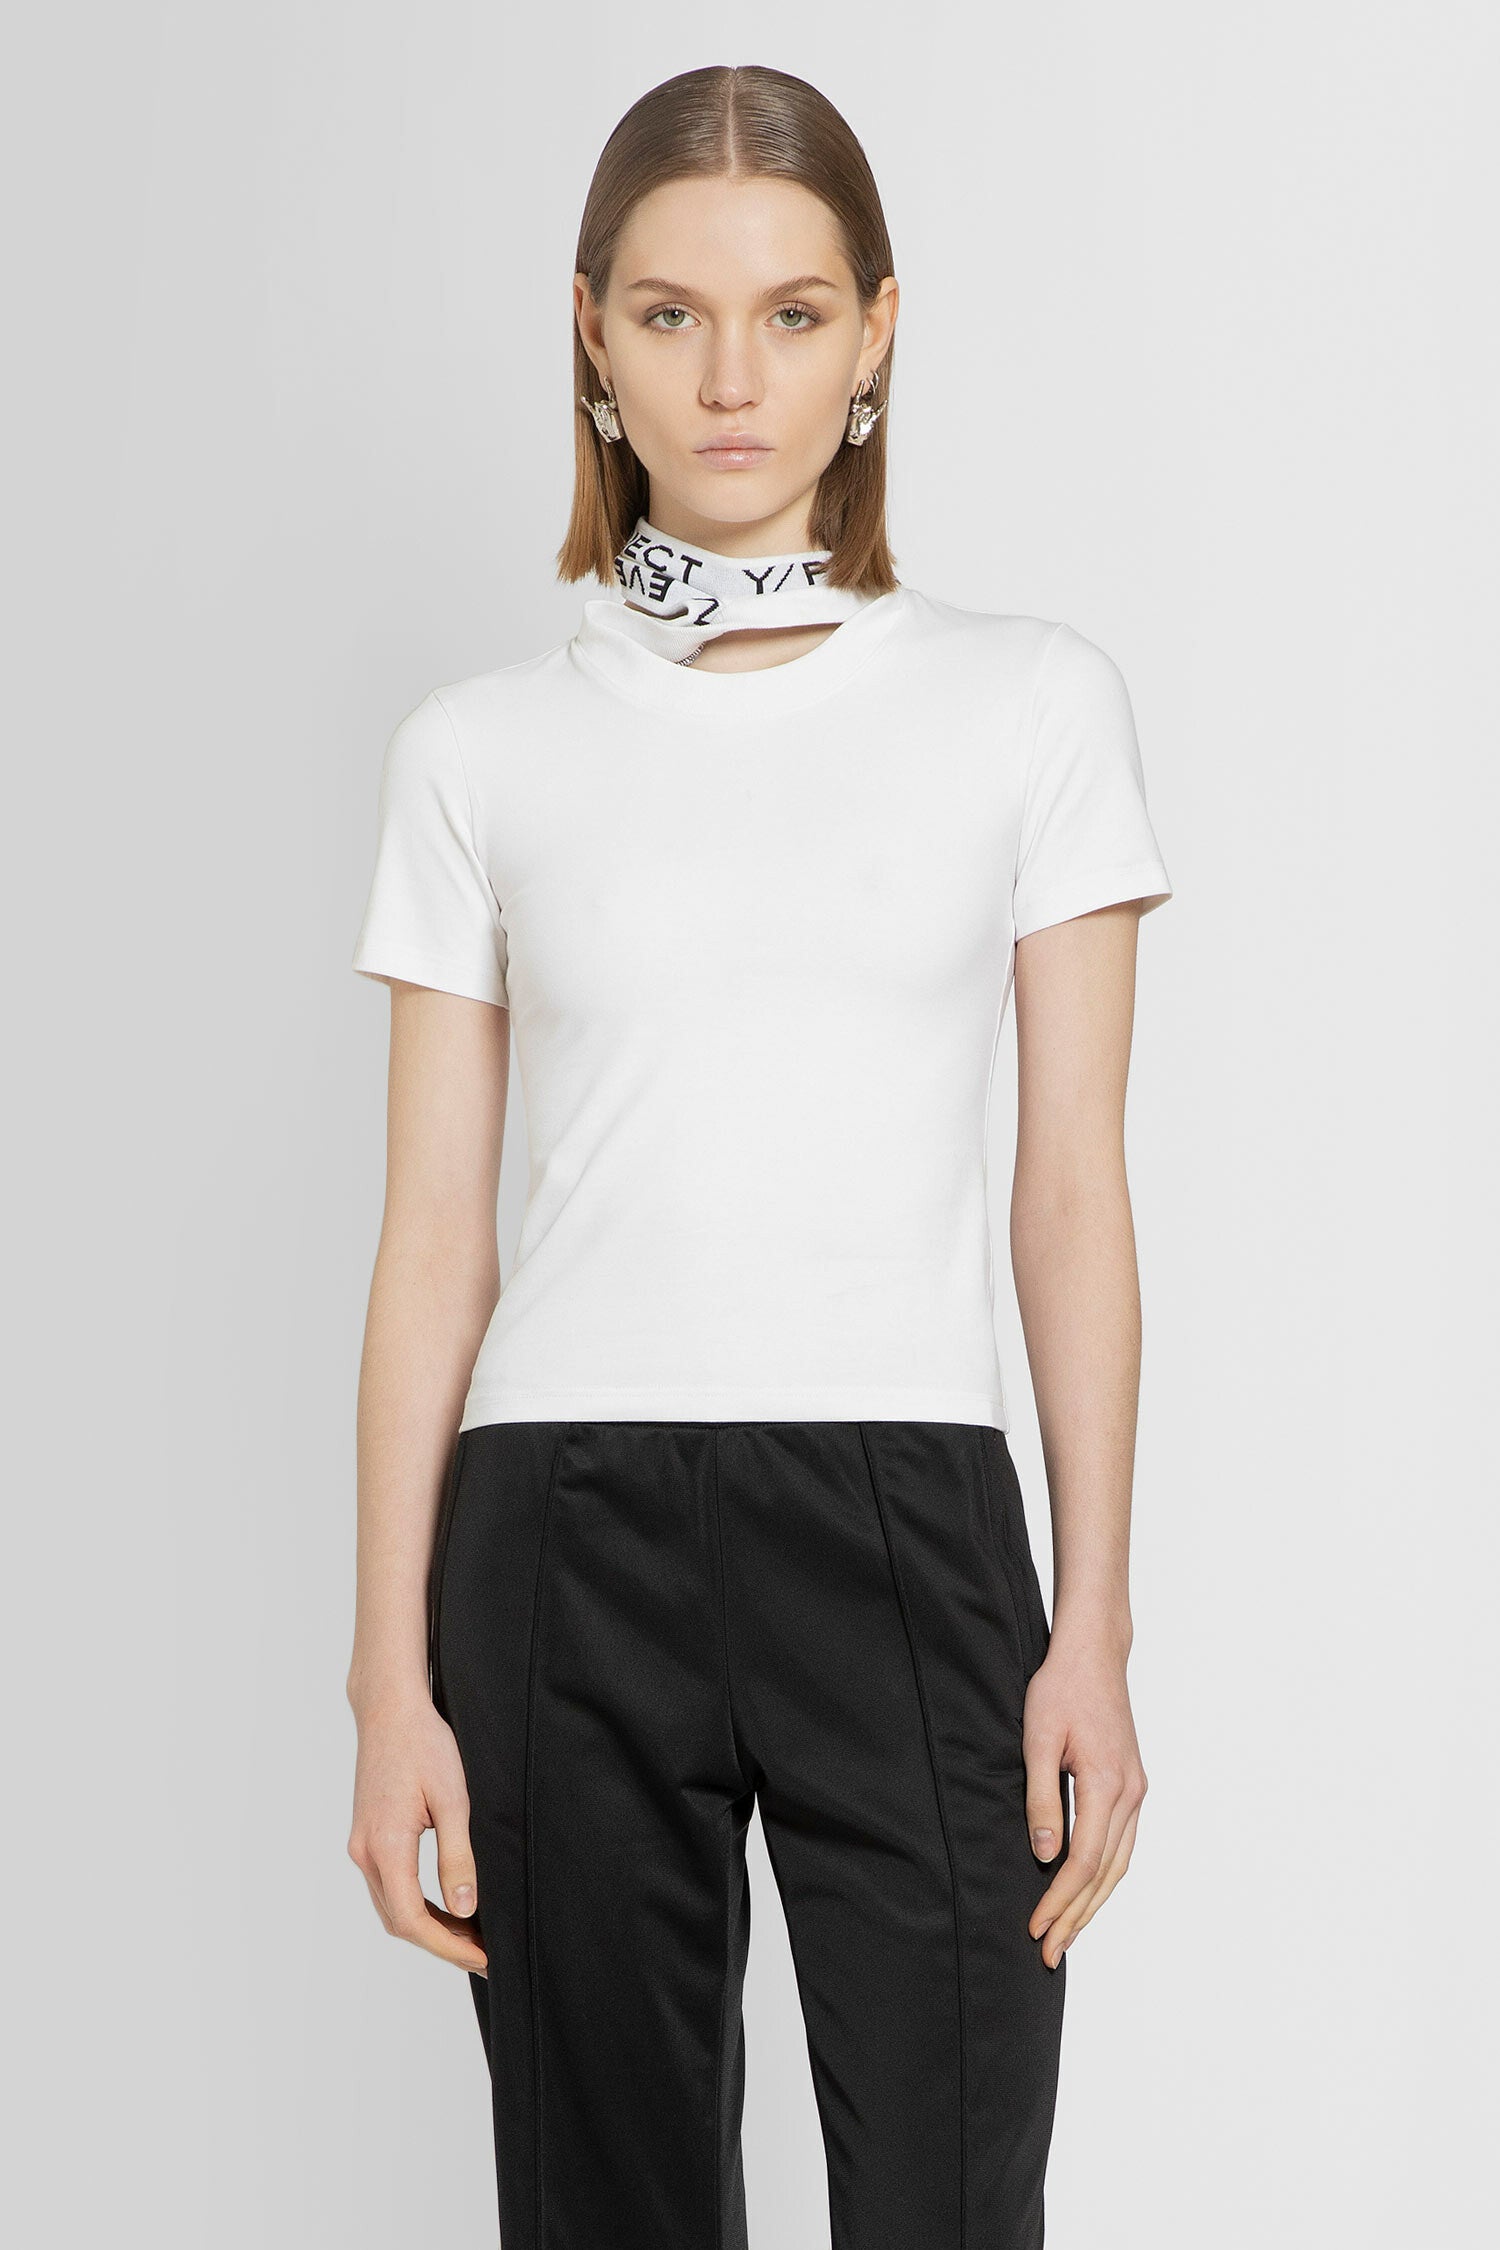 Y/PROJECT WOMAN WHITE T-SHIRTS - Y/PROJECT - T-SHIRTS | Antonioli